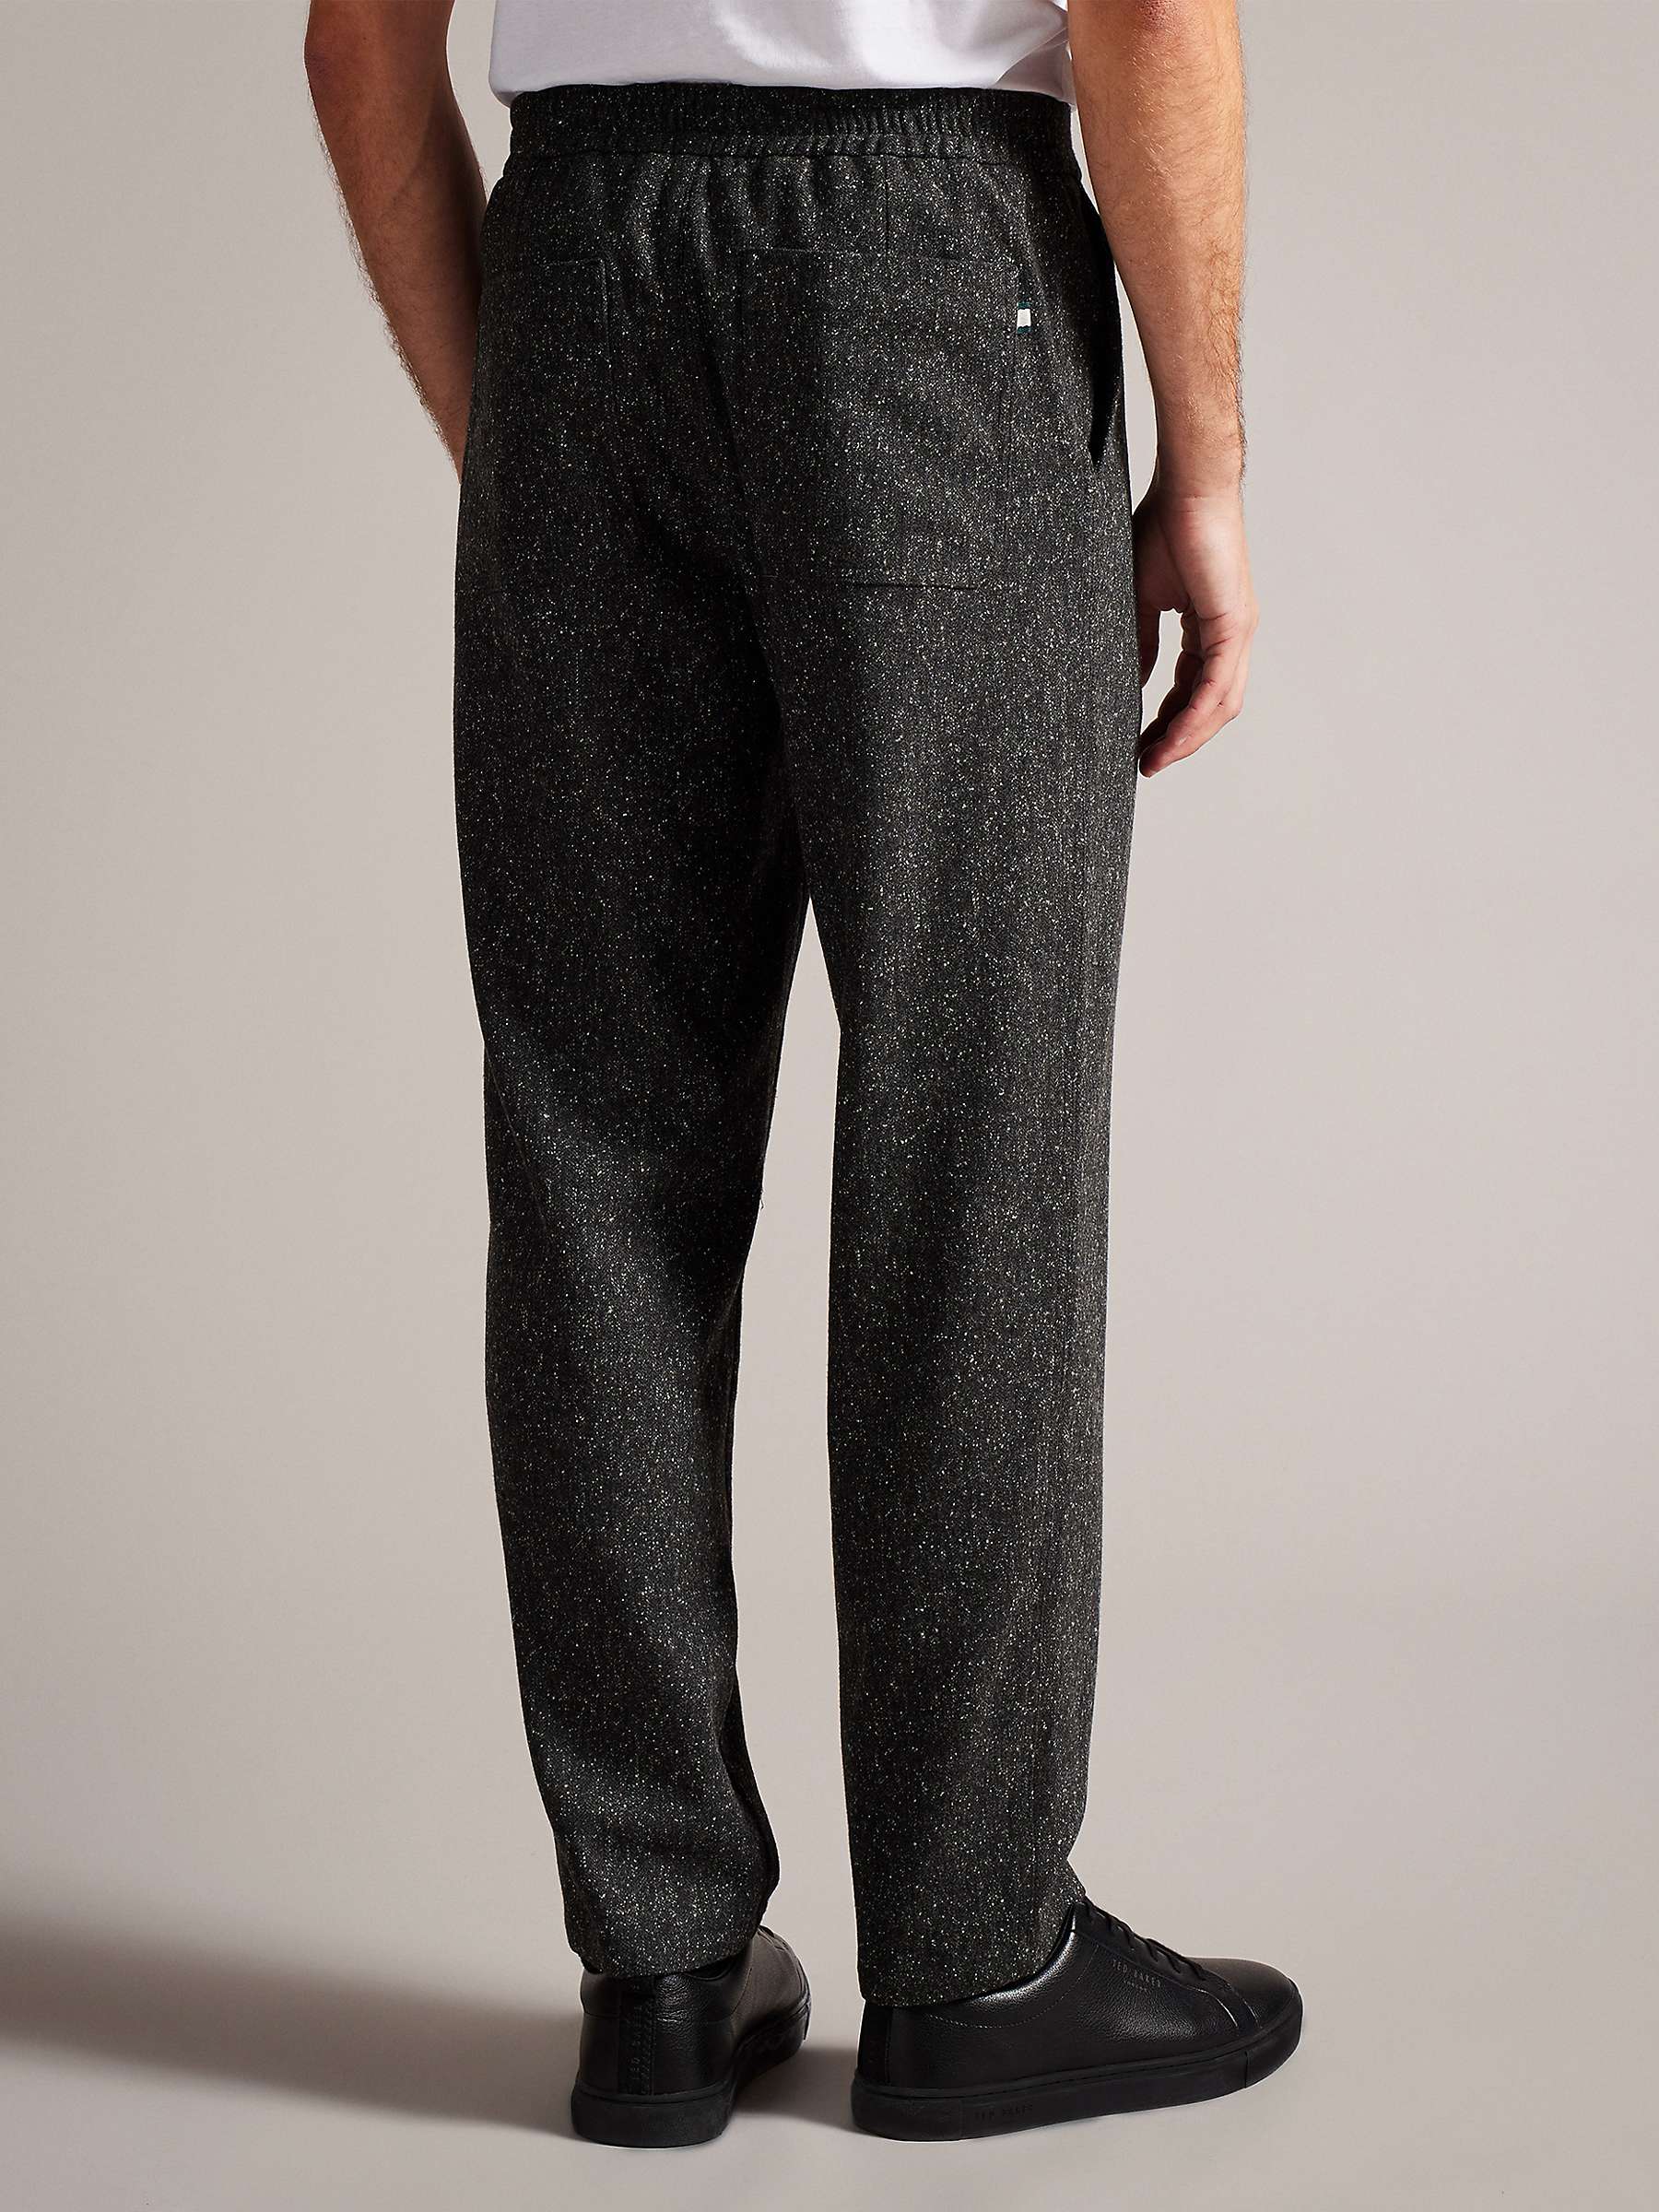 Ted Baker Lopus Wide Fit Wool Rich Trousers, Grey at John Lewis & Partners